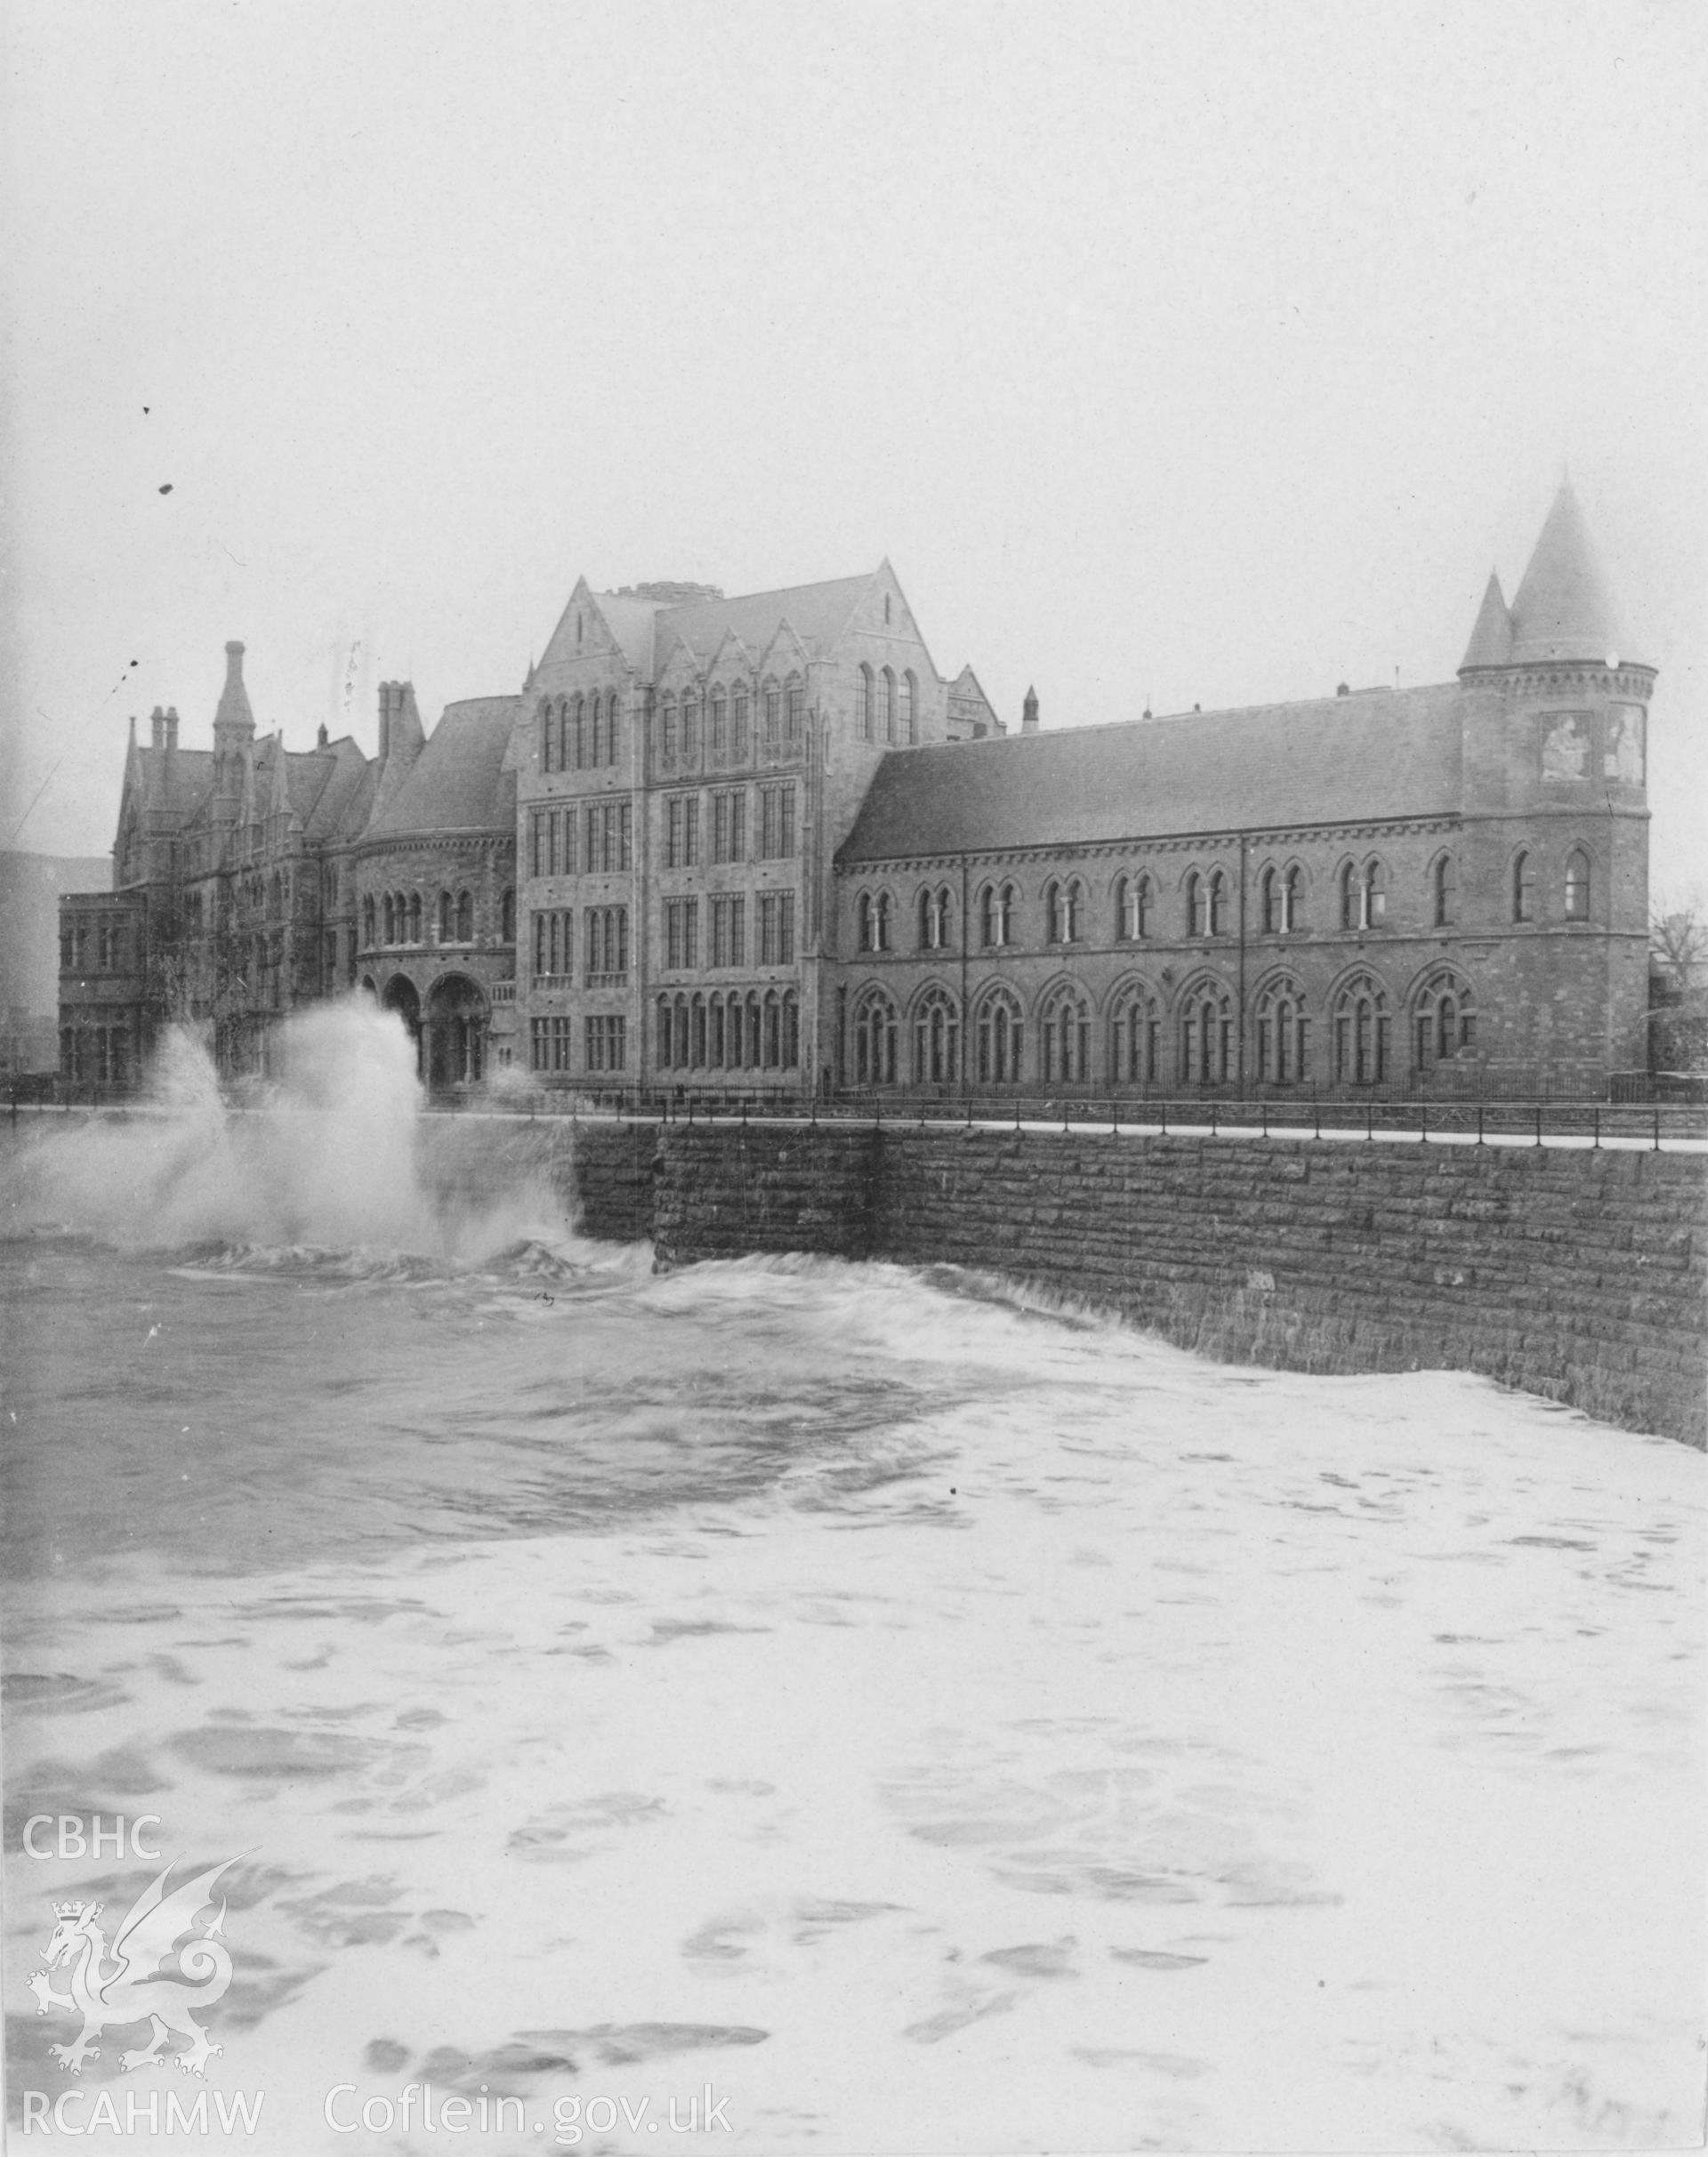 'by W R Saer 1910', view of Old College, Aberystwyth. Digitised from a photograph album showing views of Aberystwyth and District, produced by David John Saer, school teacher of Aberystwyth. Loaned for copying by Dr Alan Chamberlain.